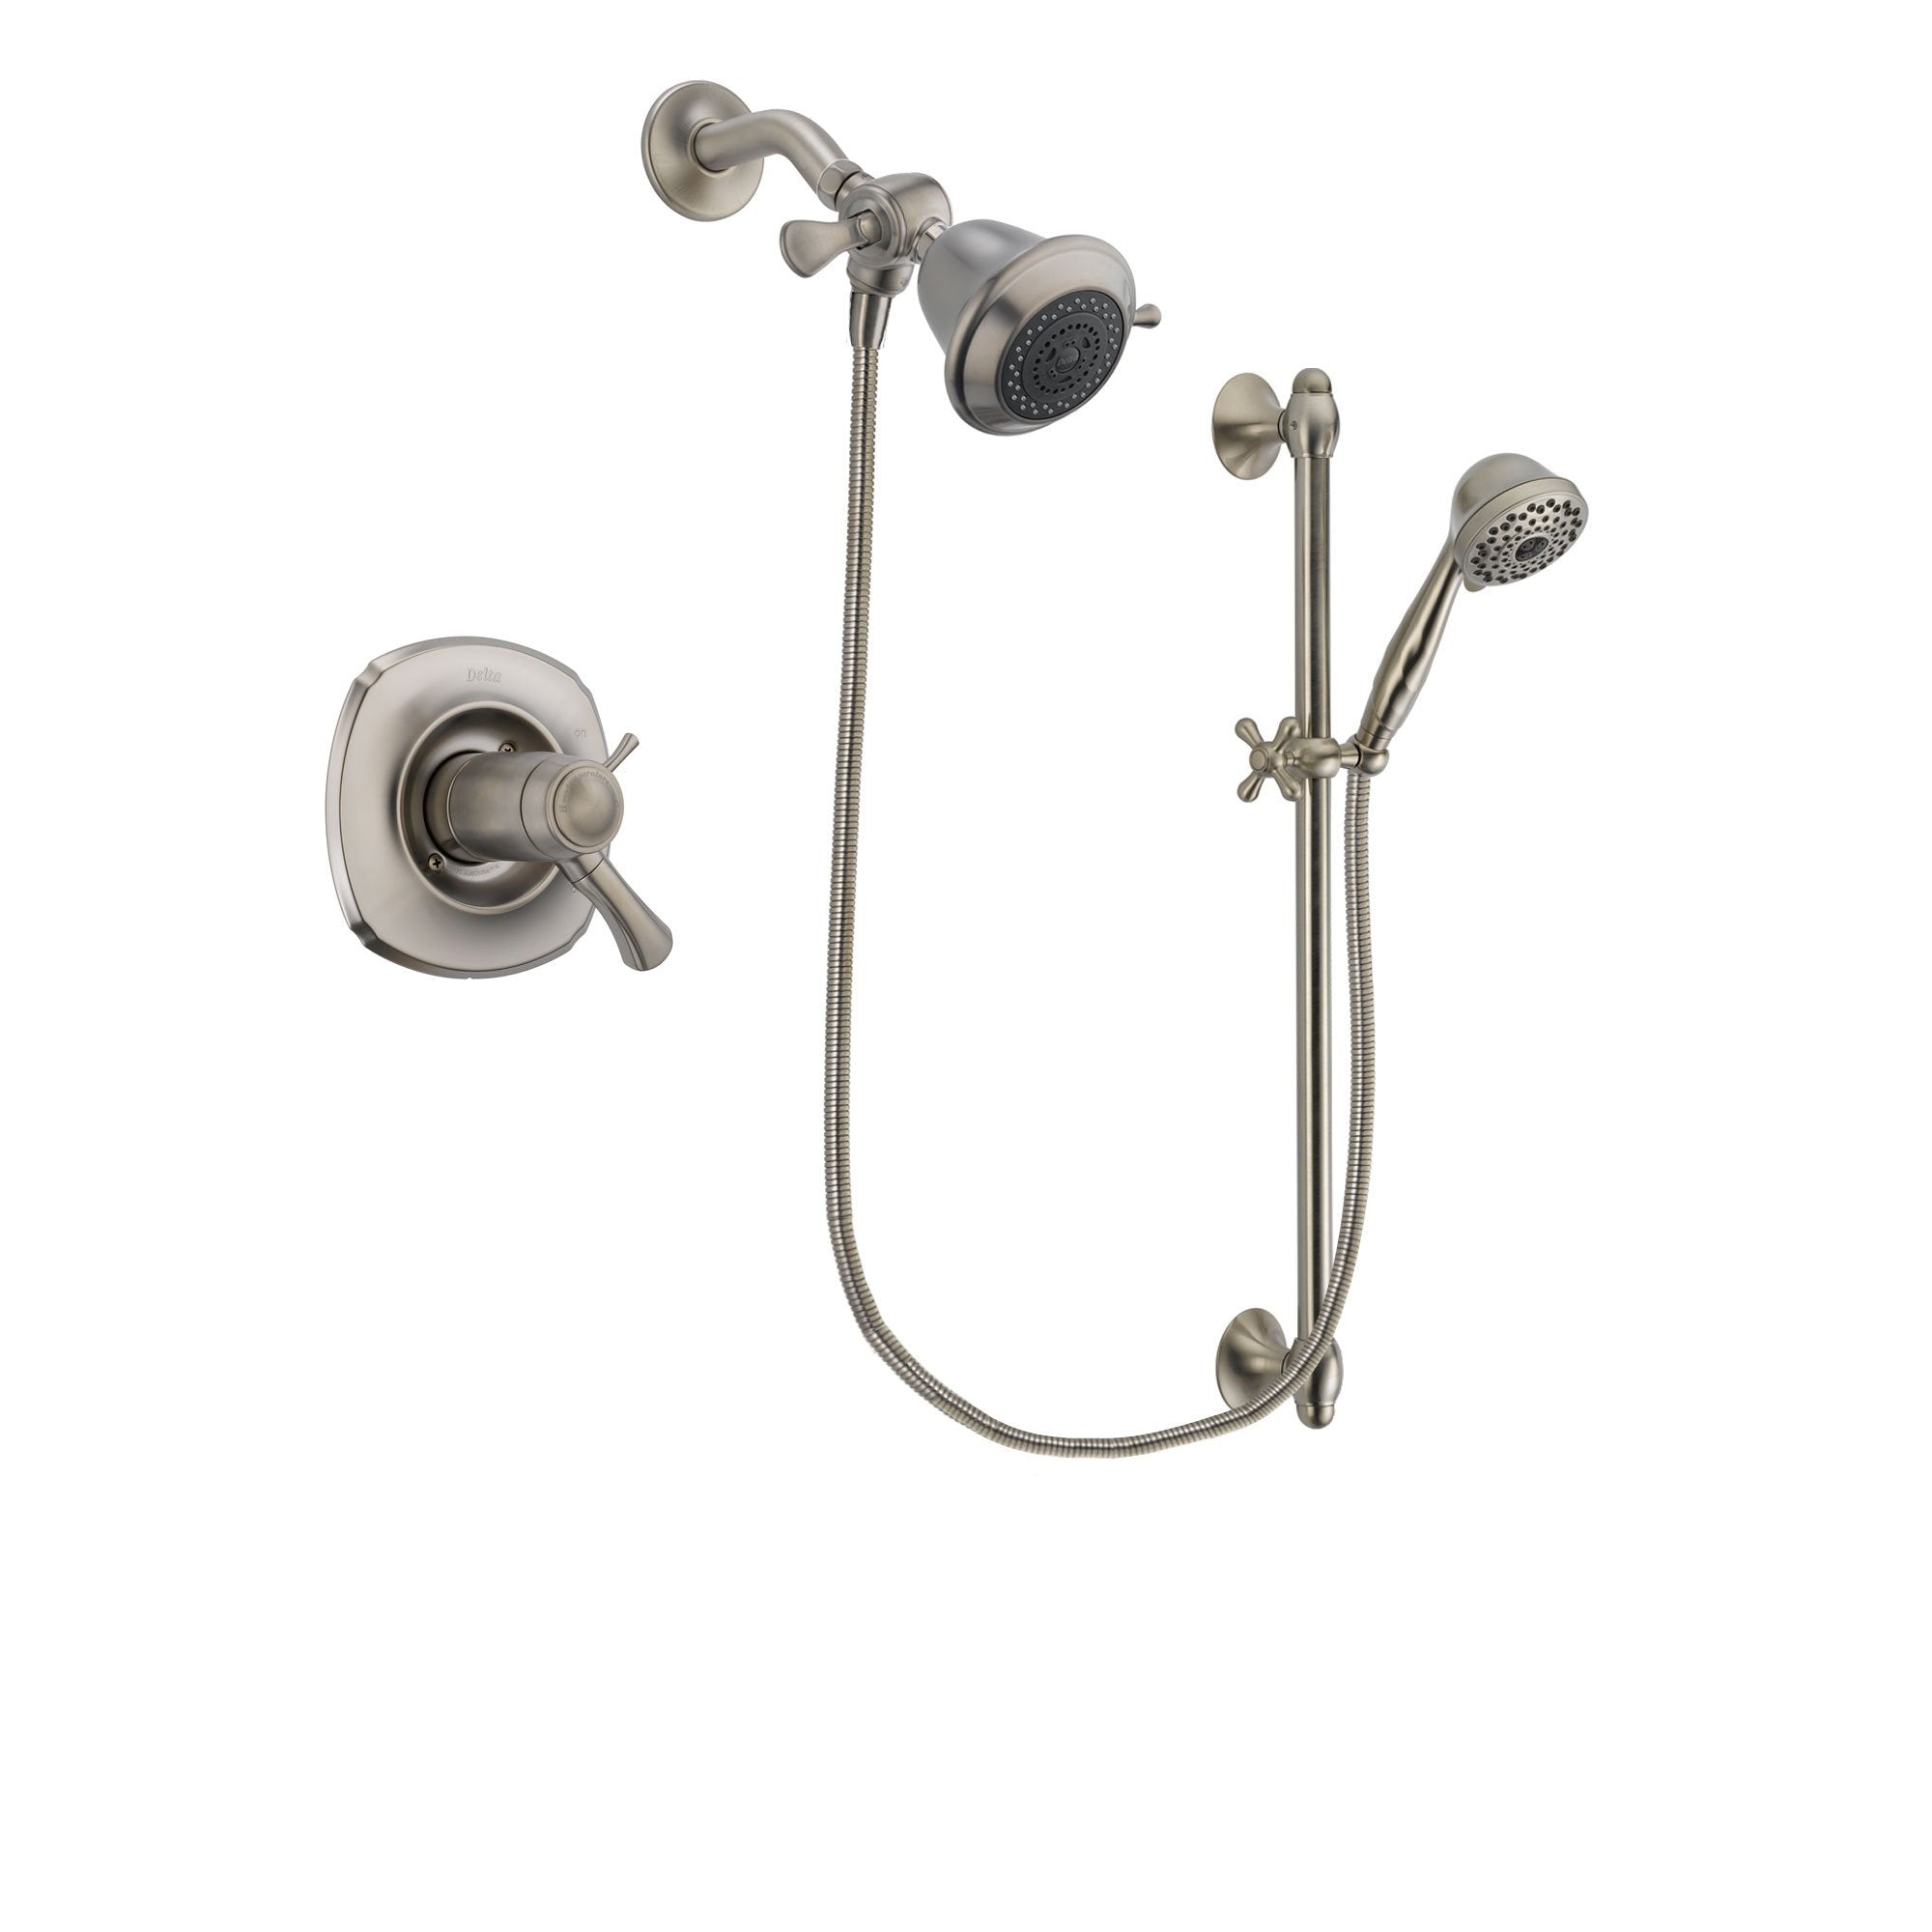 Delta Addison Stainless Steel Finish Thermostatic Shower Faucet System Package with Shower Head and 7-Spray Handheld Shower with Slide Bar Includes Rough-in Valve DSP1656V